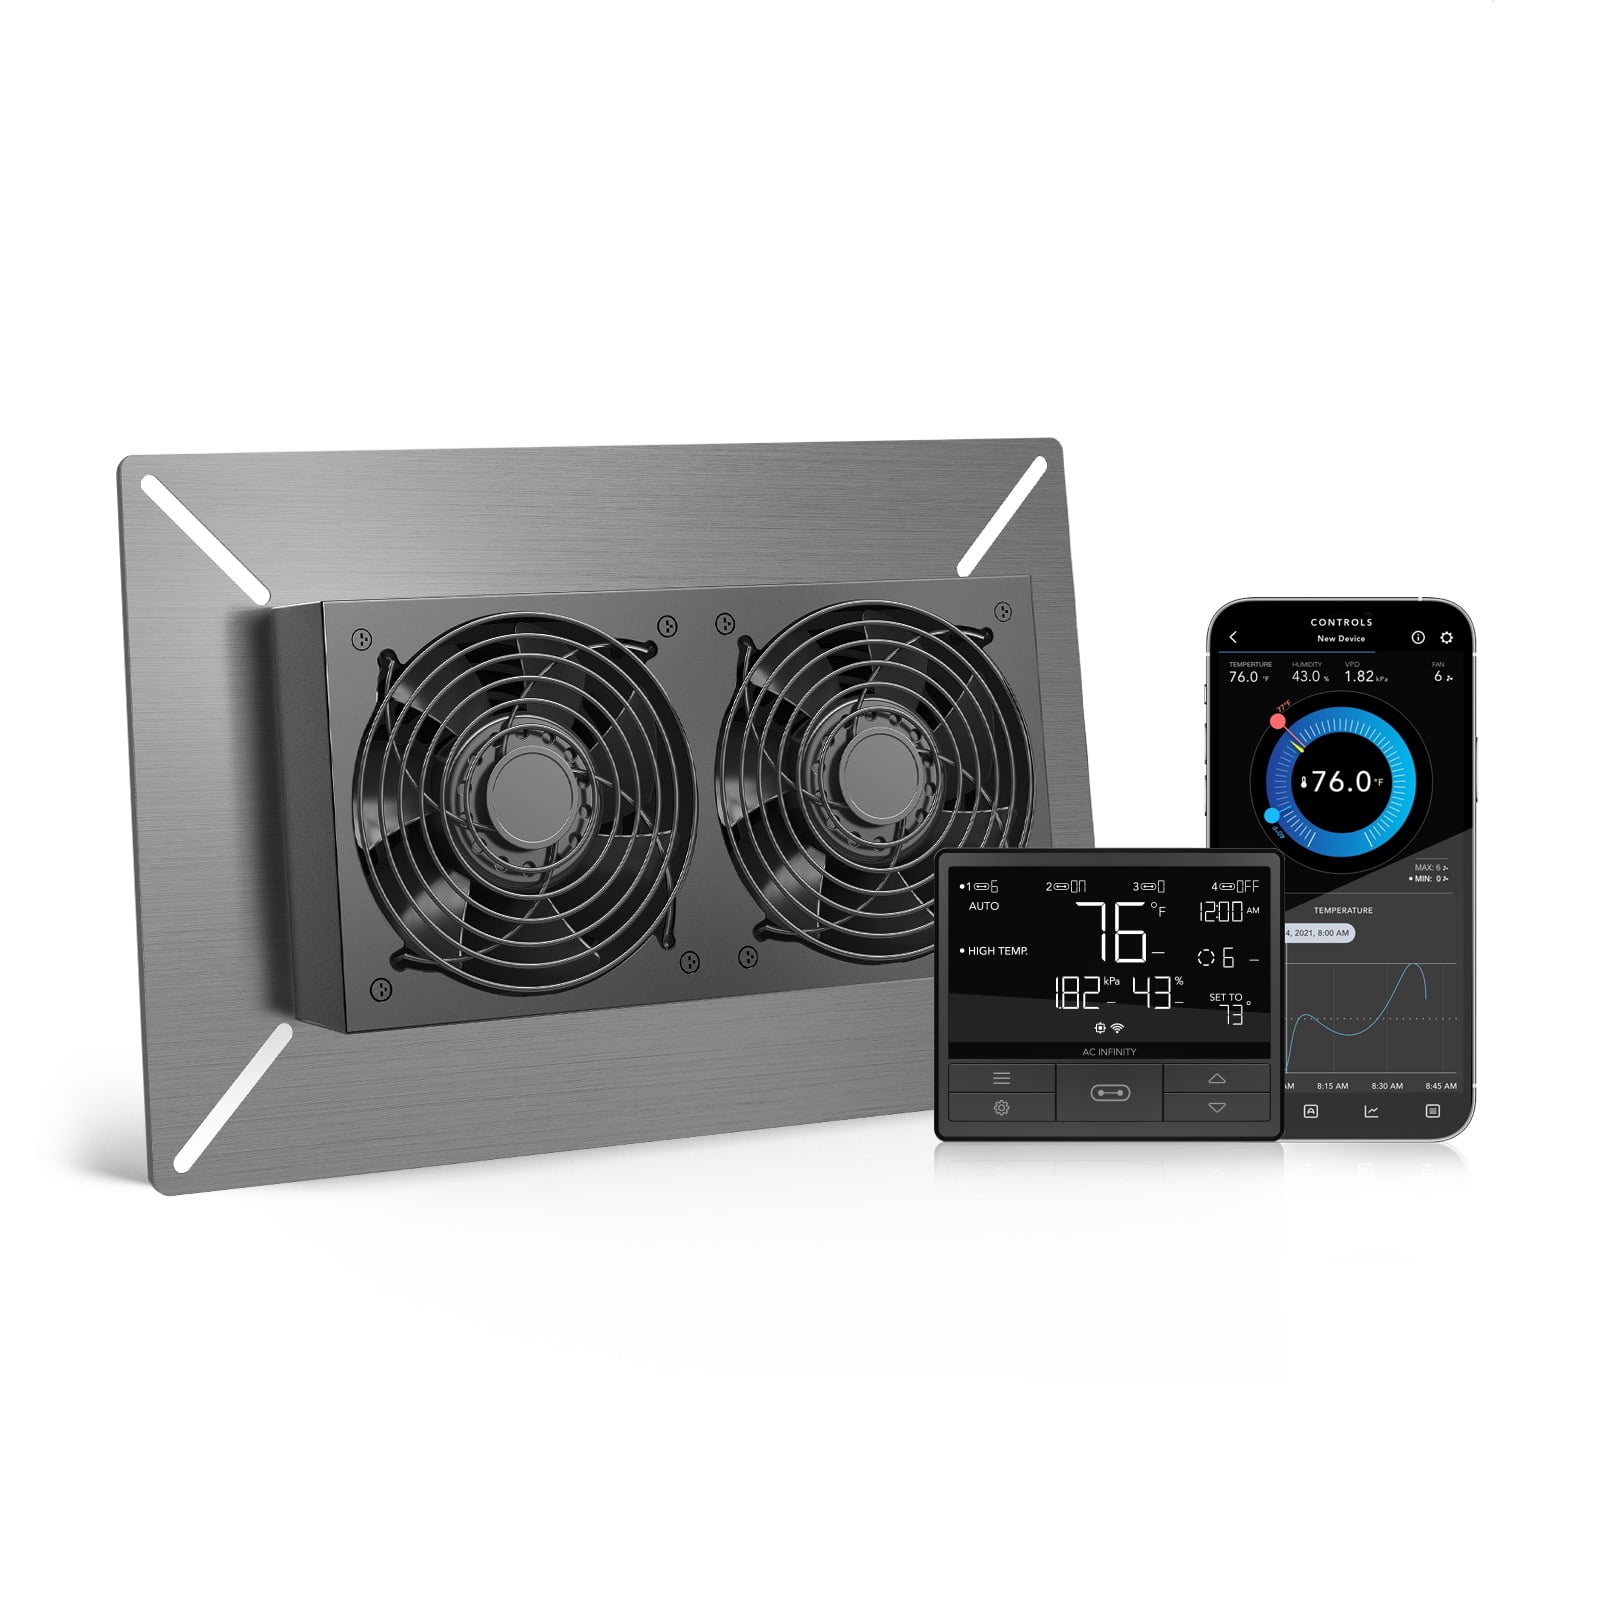 AC Infinity AIRTITAN T7, Ventilation Fan 12 with Temperature Humidity